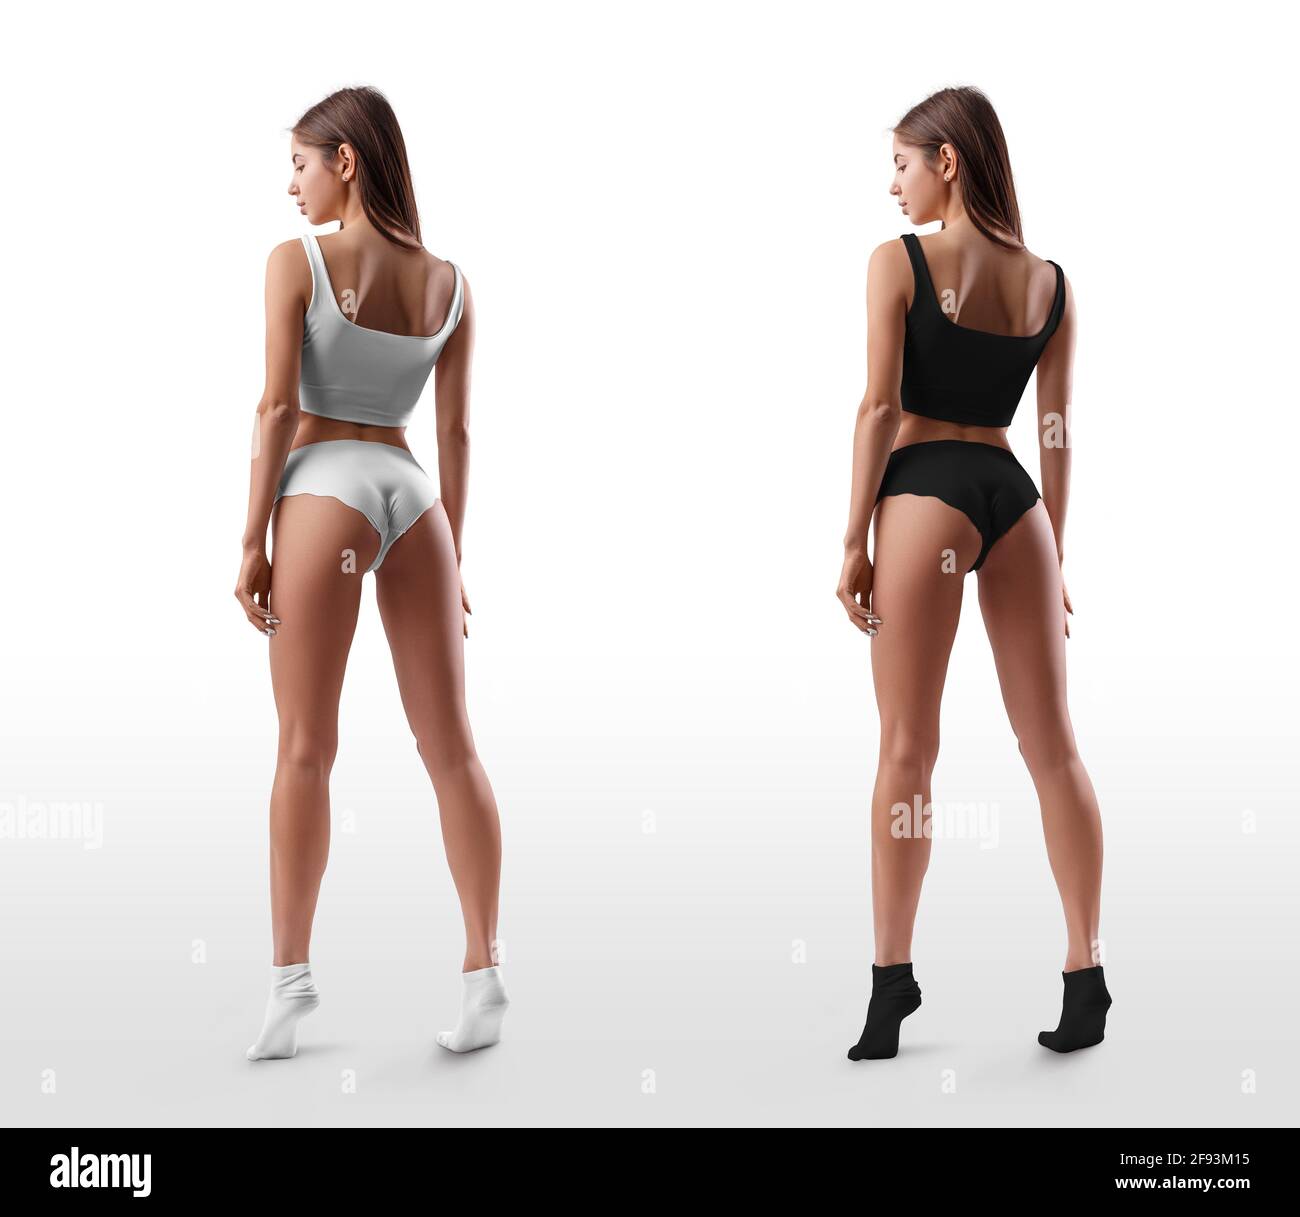 https://c8.alamy.com/comp/2F93M15/white-black-underwear-template-on-sexy-girl-body-rear-view-isolated-on-background-in-studio-mockup-of-clothes-seamless-top-and-panties-for-desig-2F93M15.jpg